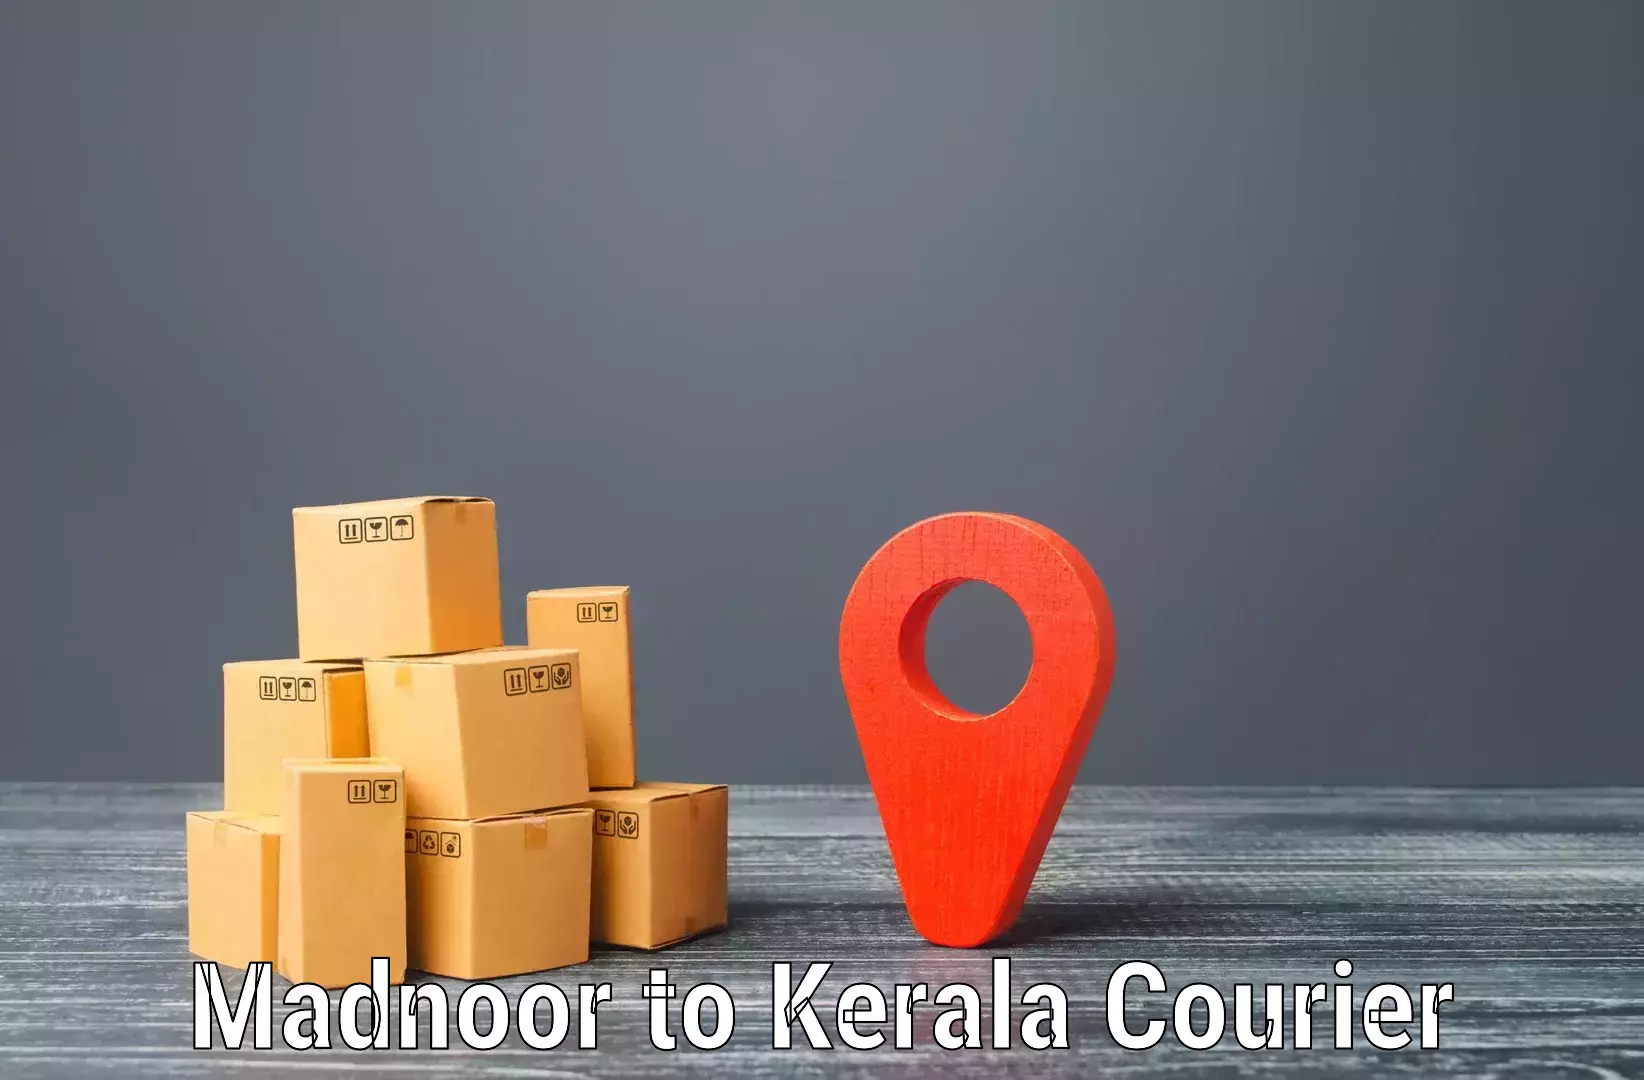 Customizable shipping options Madnoor to Kollam